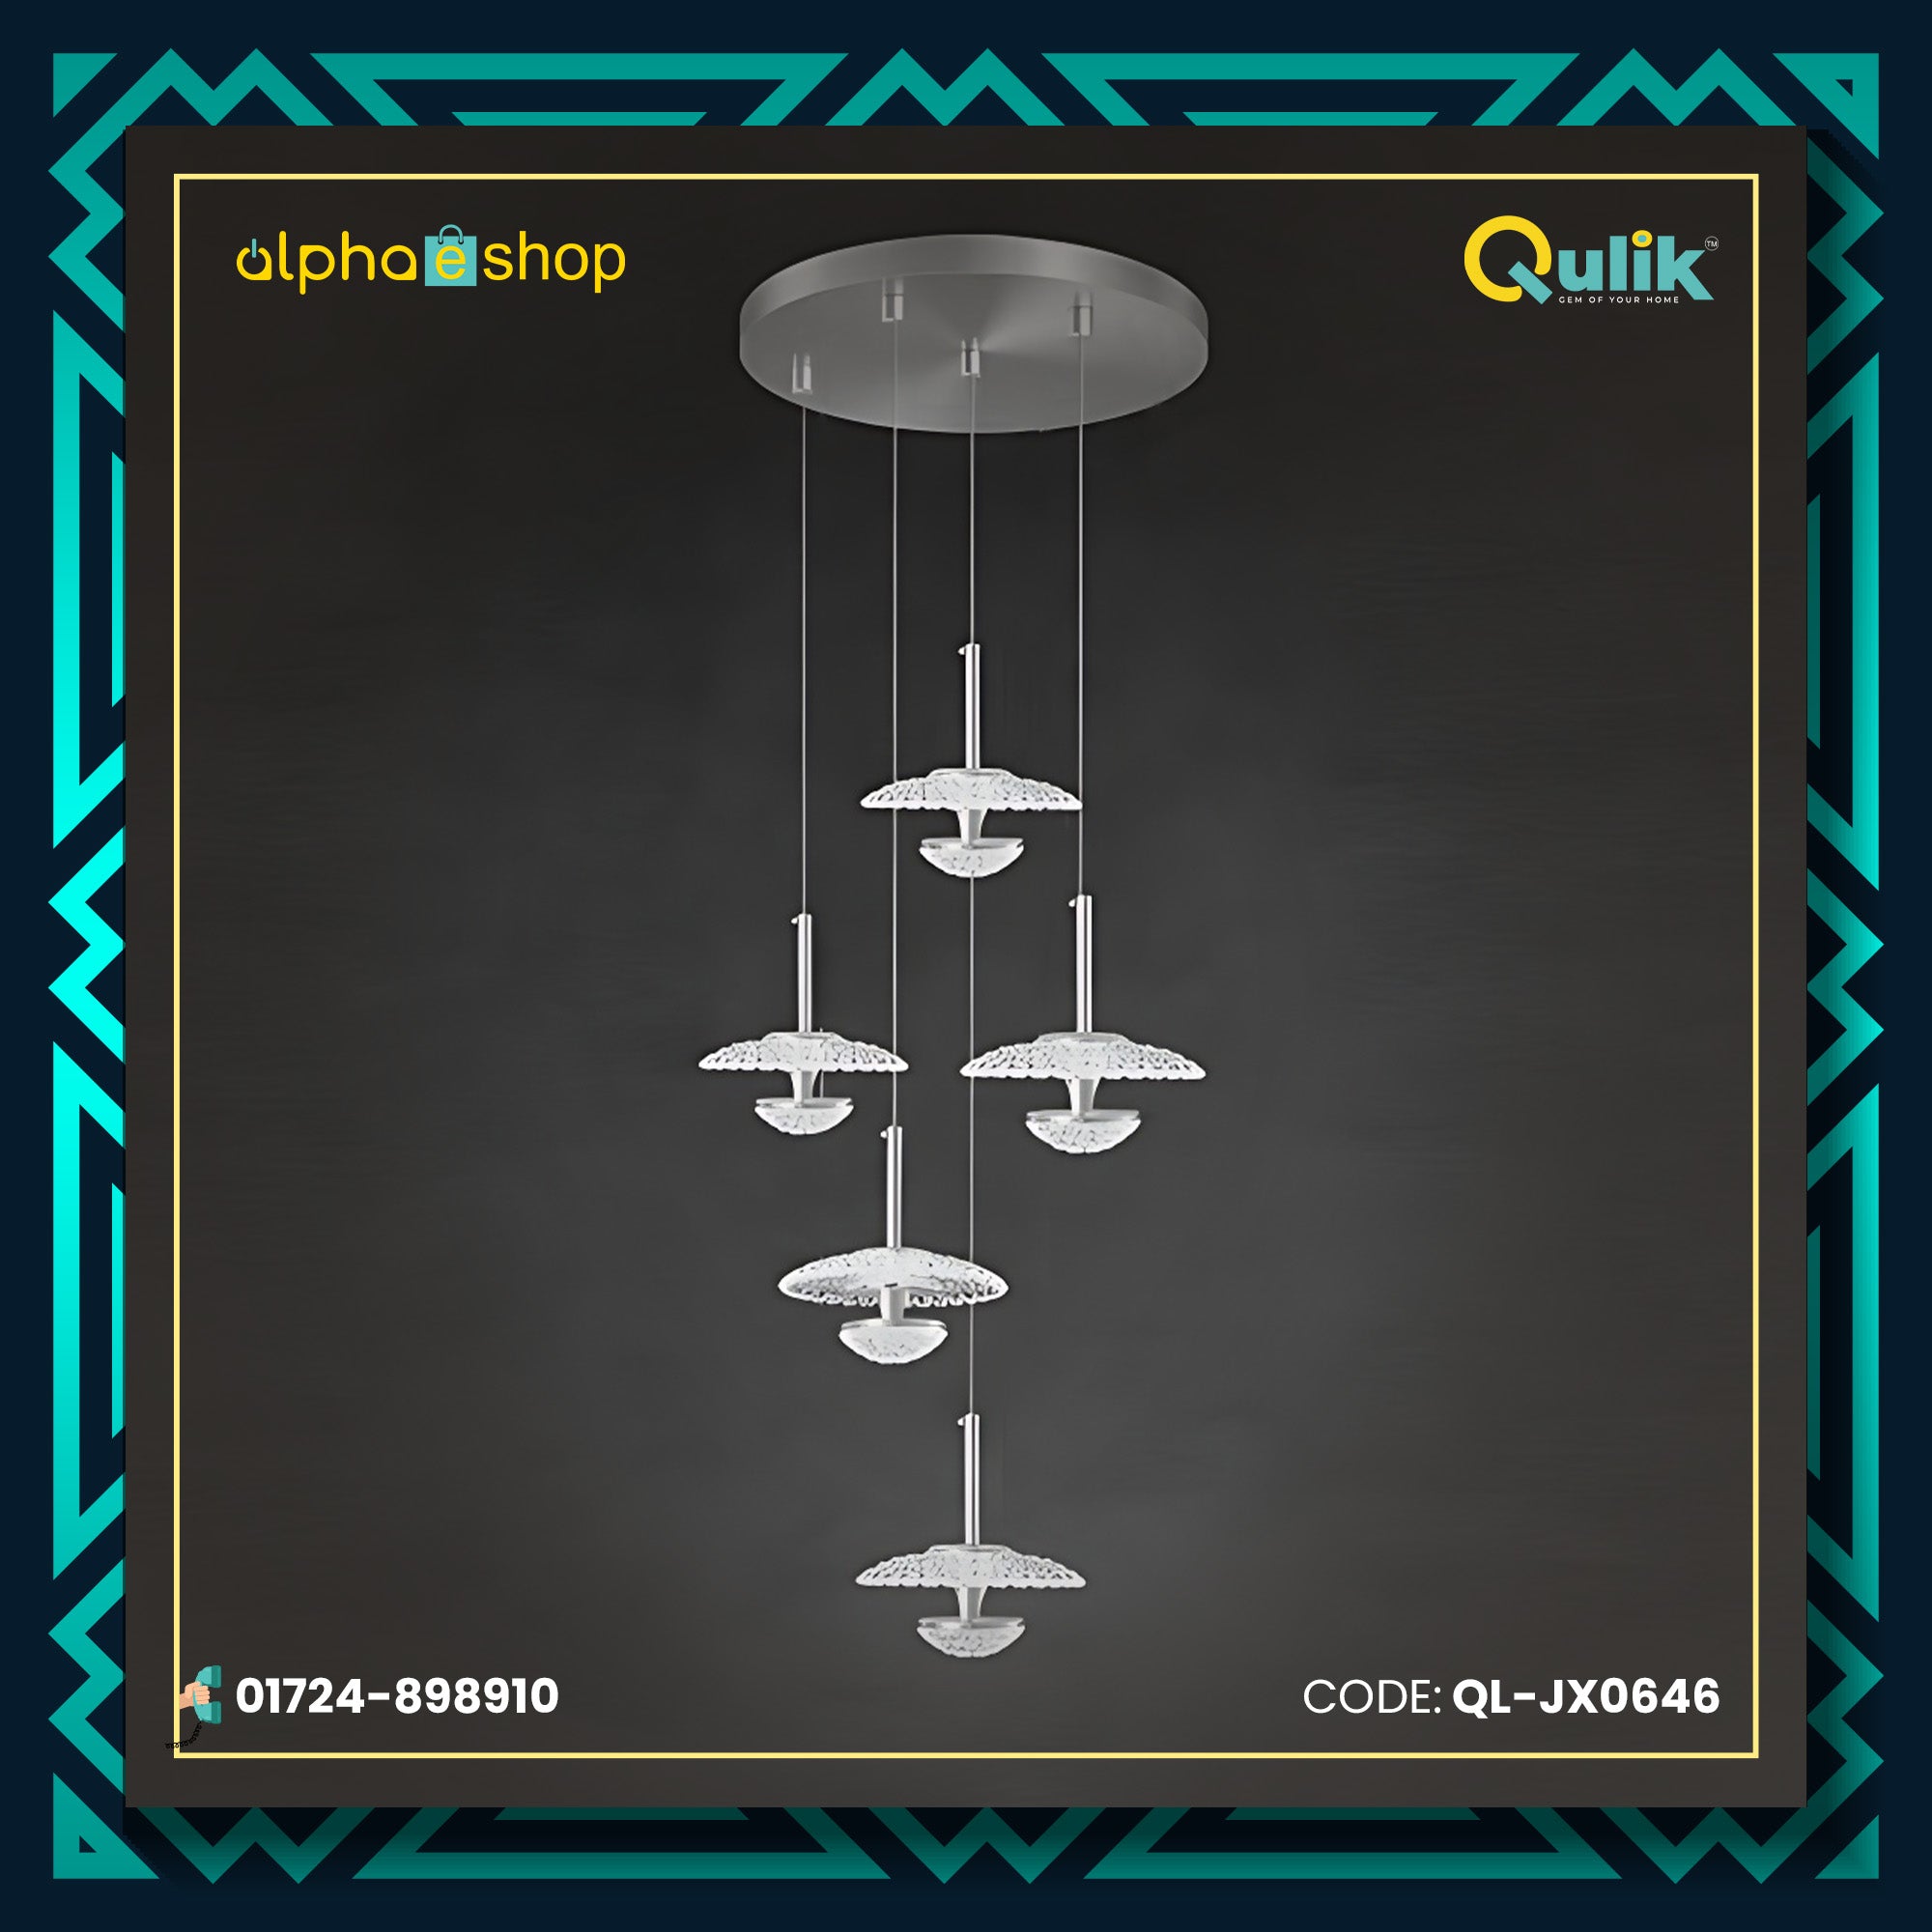 Qulik QL-JX0646 LED Ceiling Light - Modern Design, Energy-Efficient, 2-Year Warranty. Elevate your space with reliable and stylish illumination.